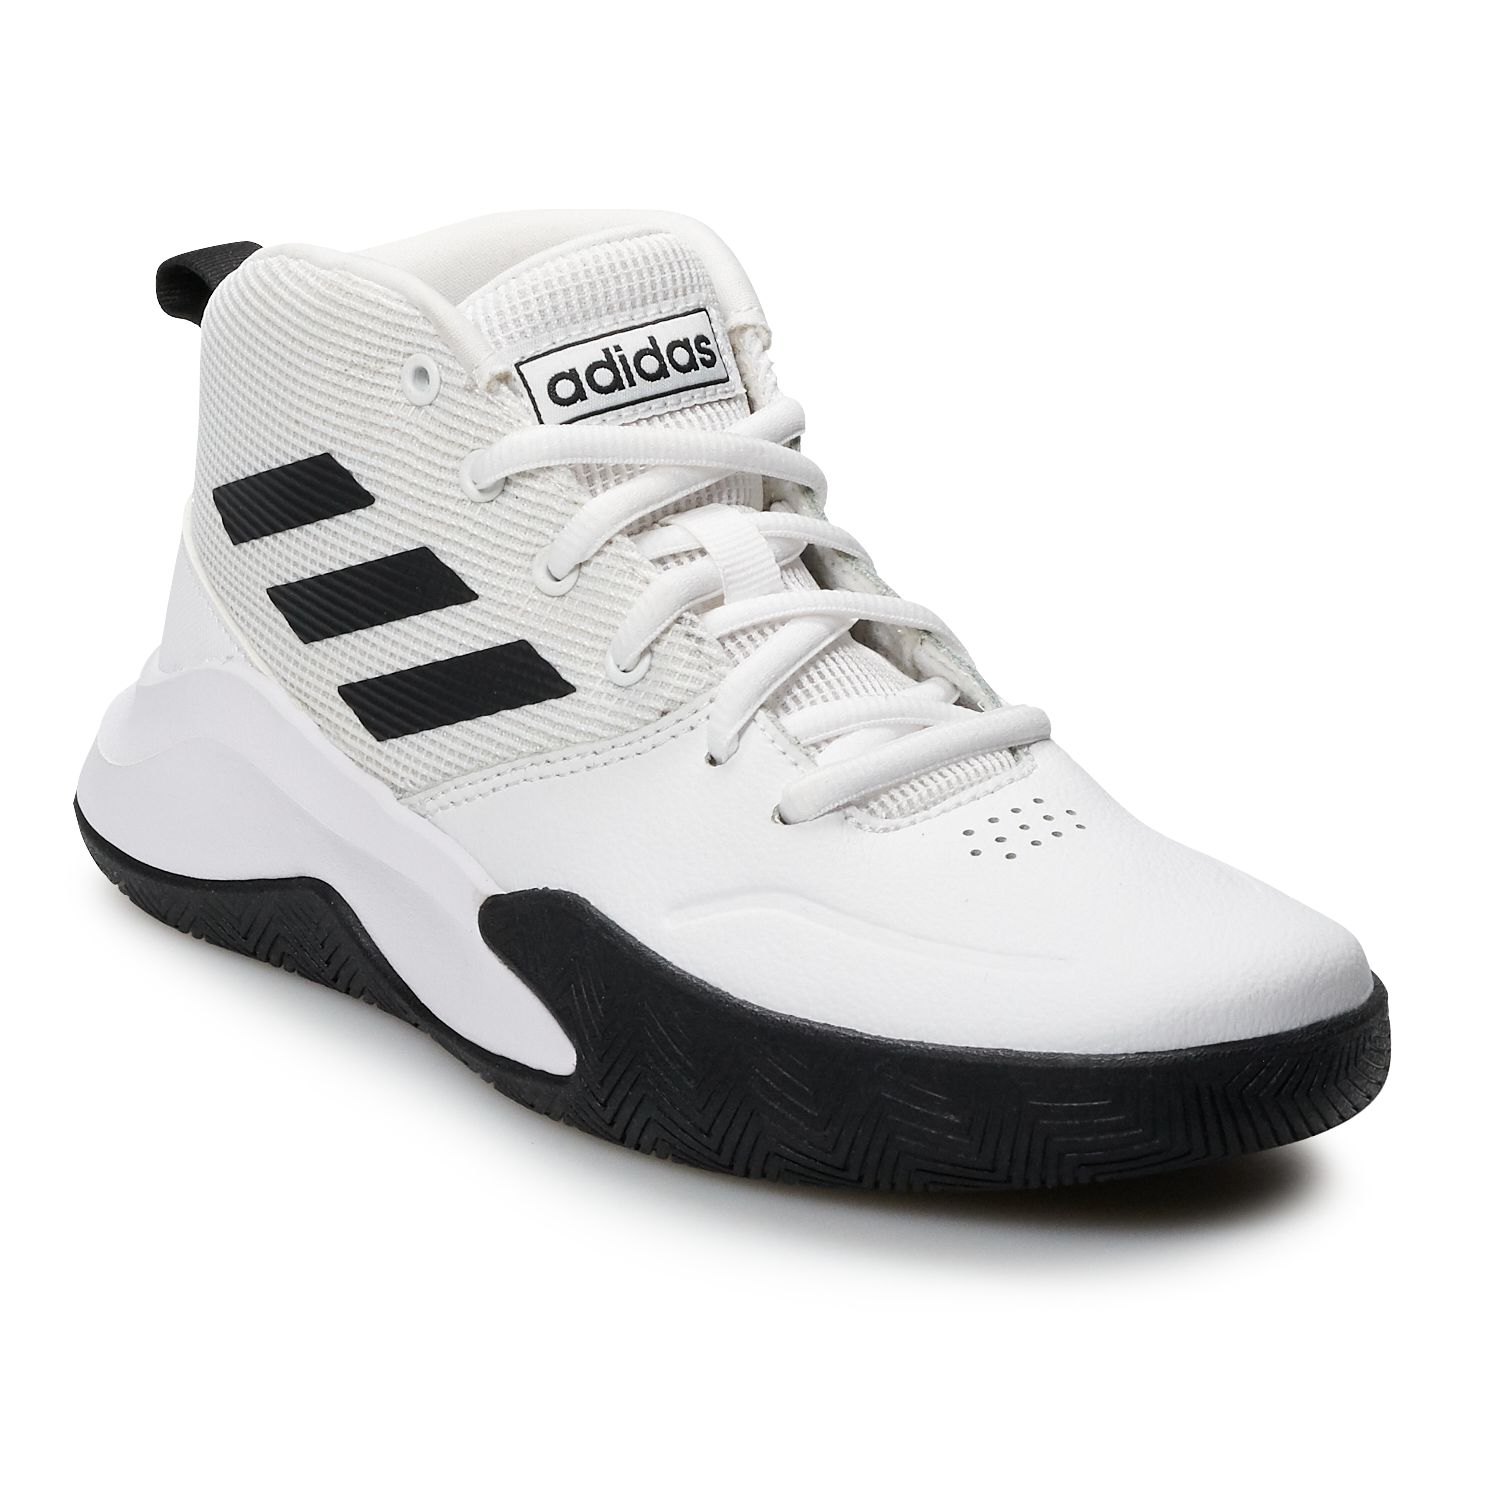 adidas own the game men's basketball shoes